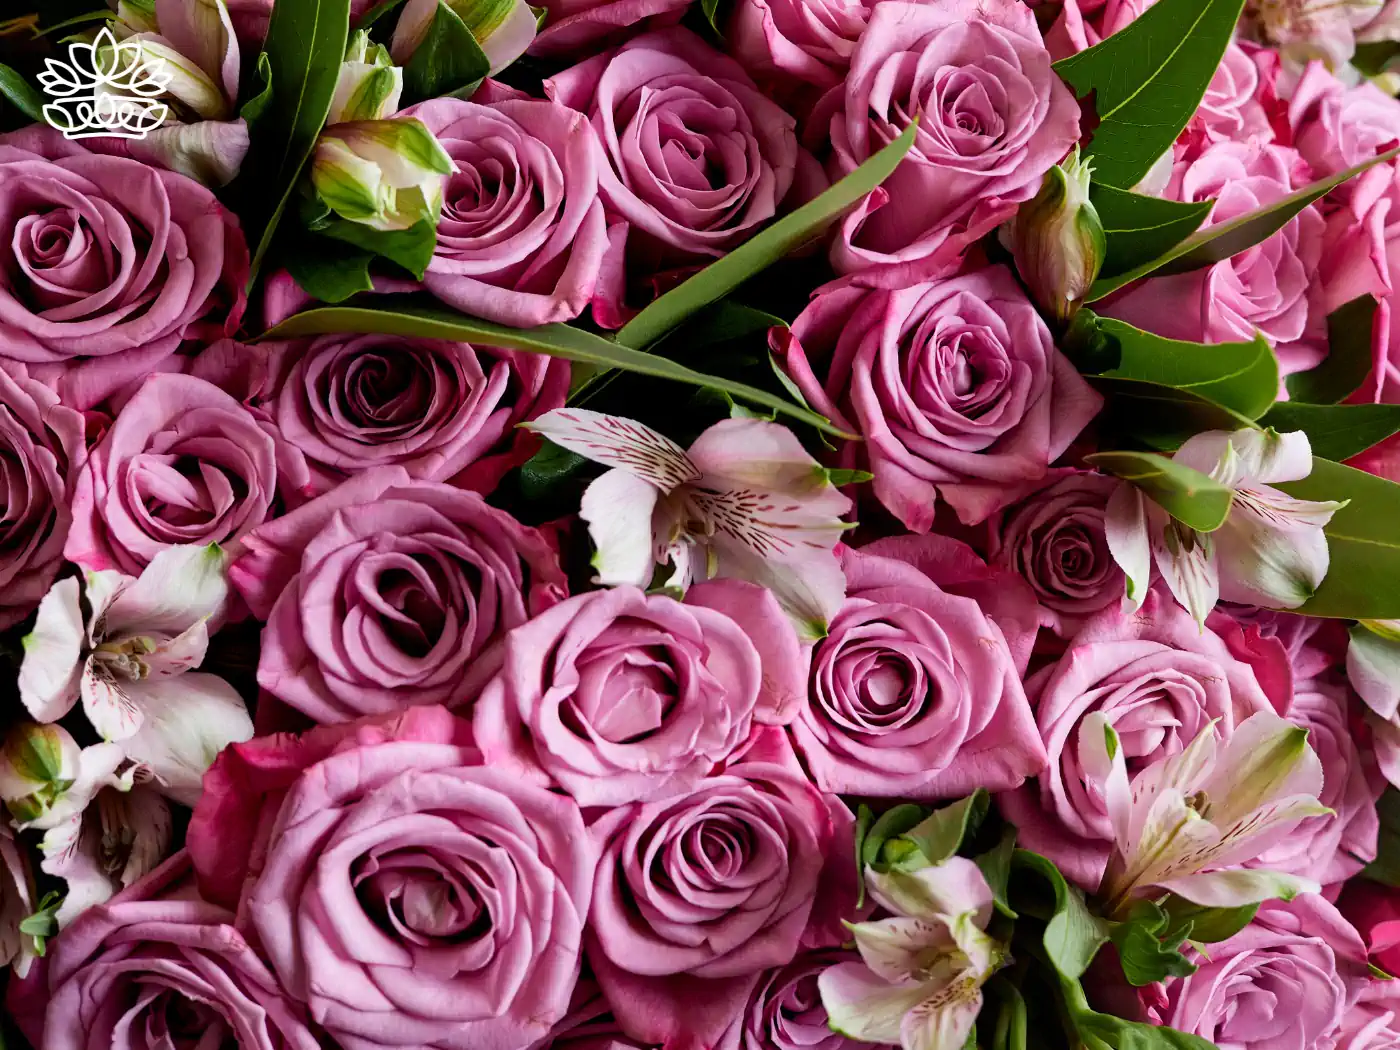 Close-up of a lavish arrangement of pink roses and white flowers. Fabulous Flowers and Gifts, Luxury Flower Arrangements.